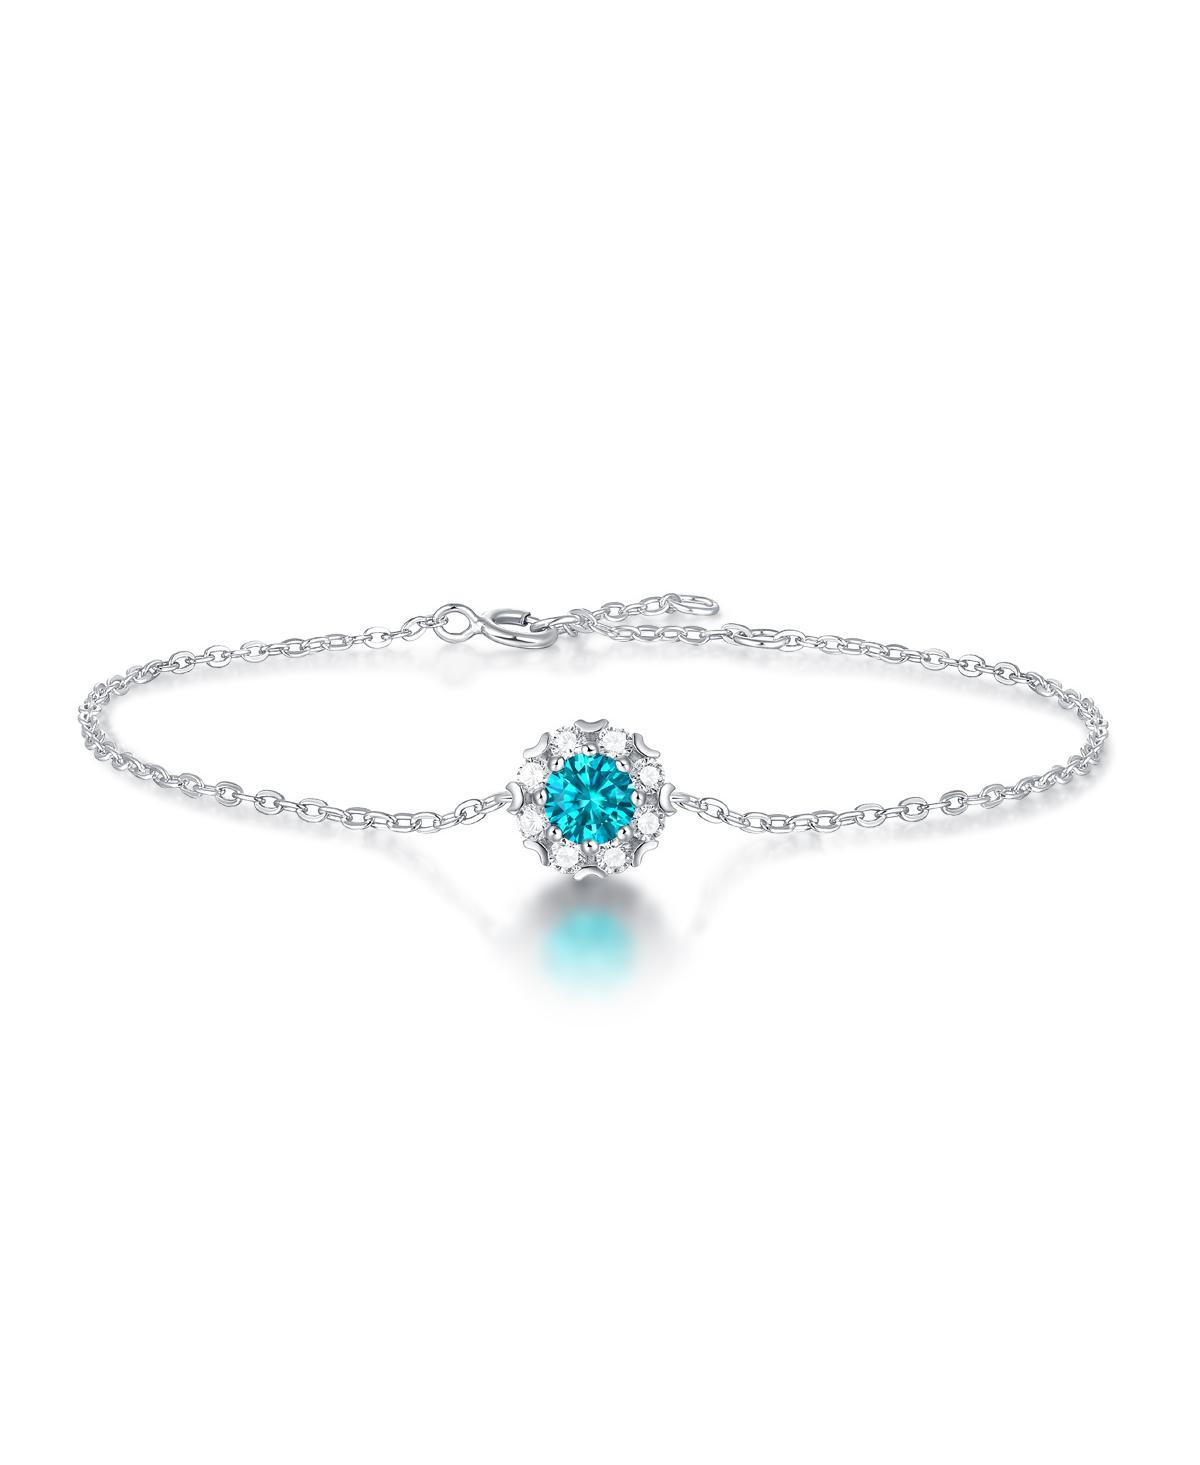 STELLA VALENTINO STERLING SILVER WHITE GOLD PLATED WITH 0.50CTW LAB CREATED MOISSANITE & BLUE TOPAZ ROUND HALO ADJUST